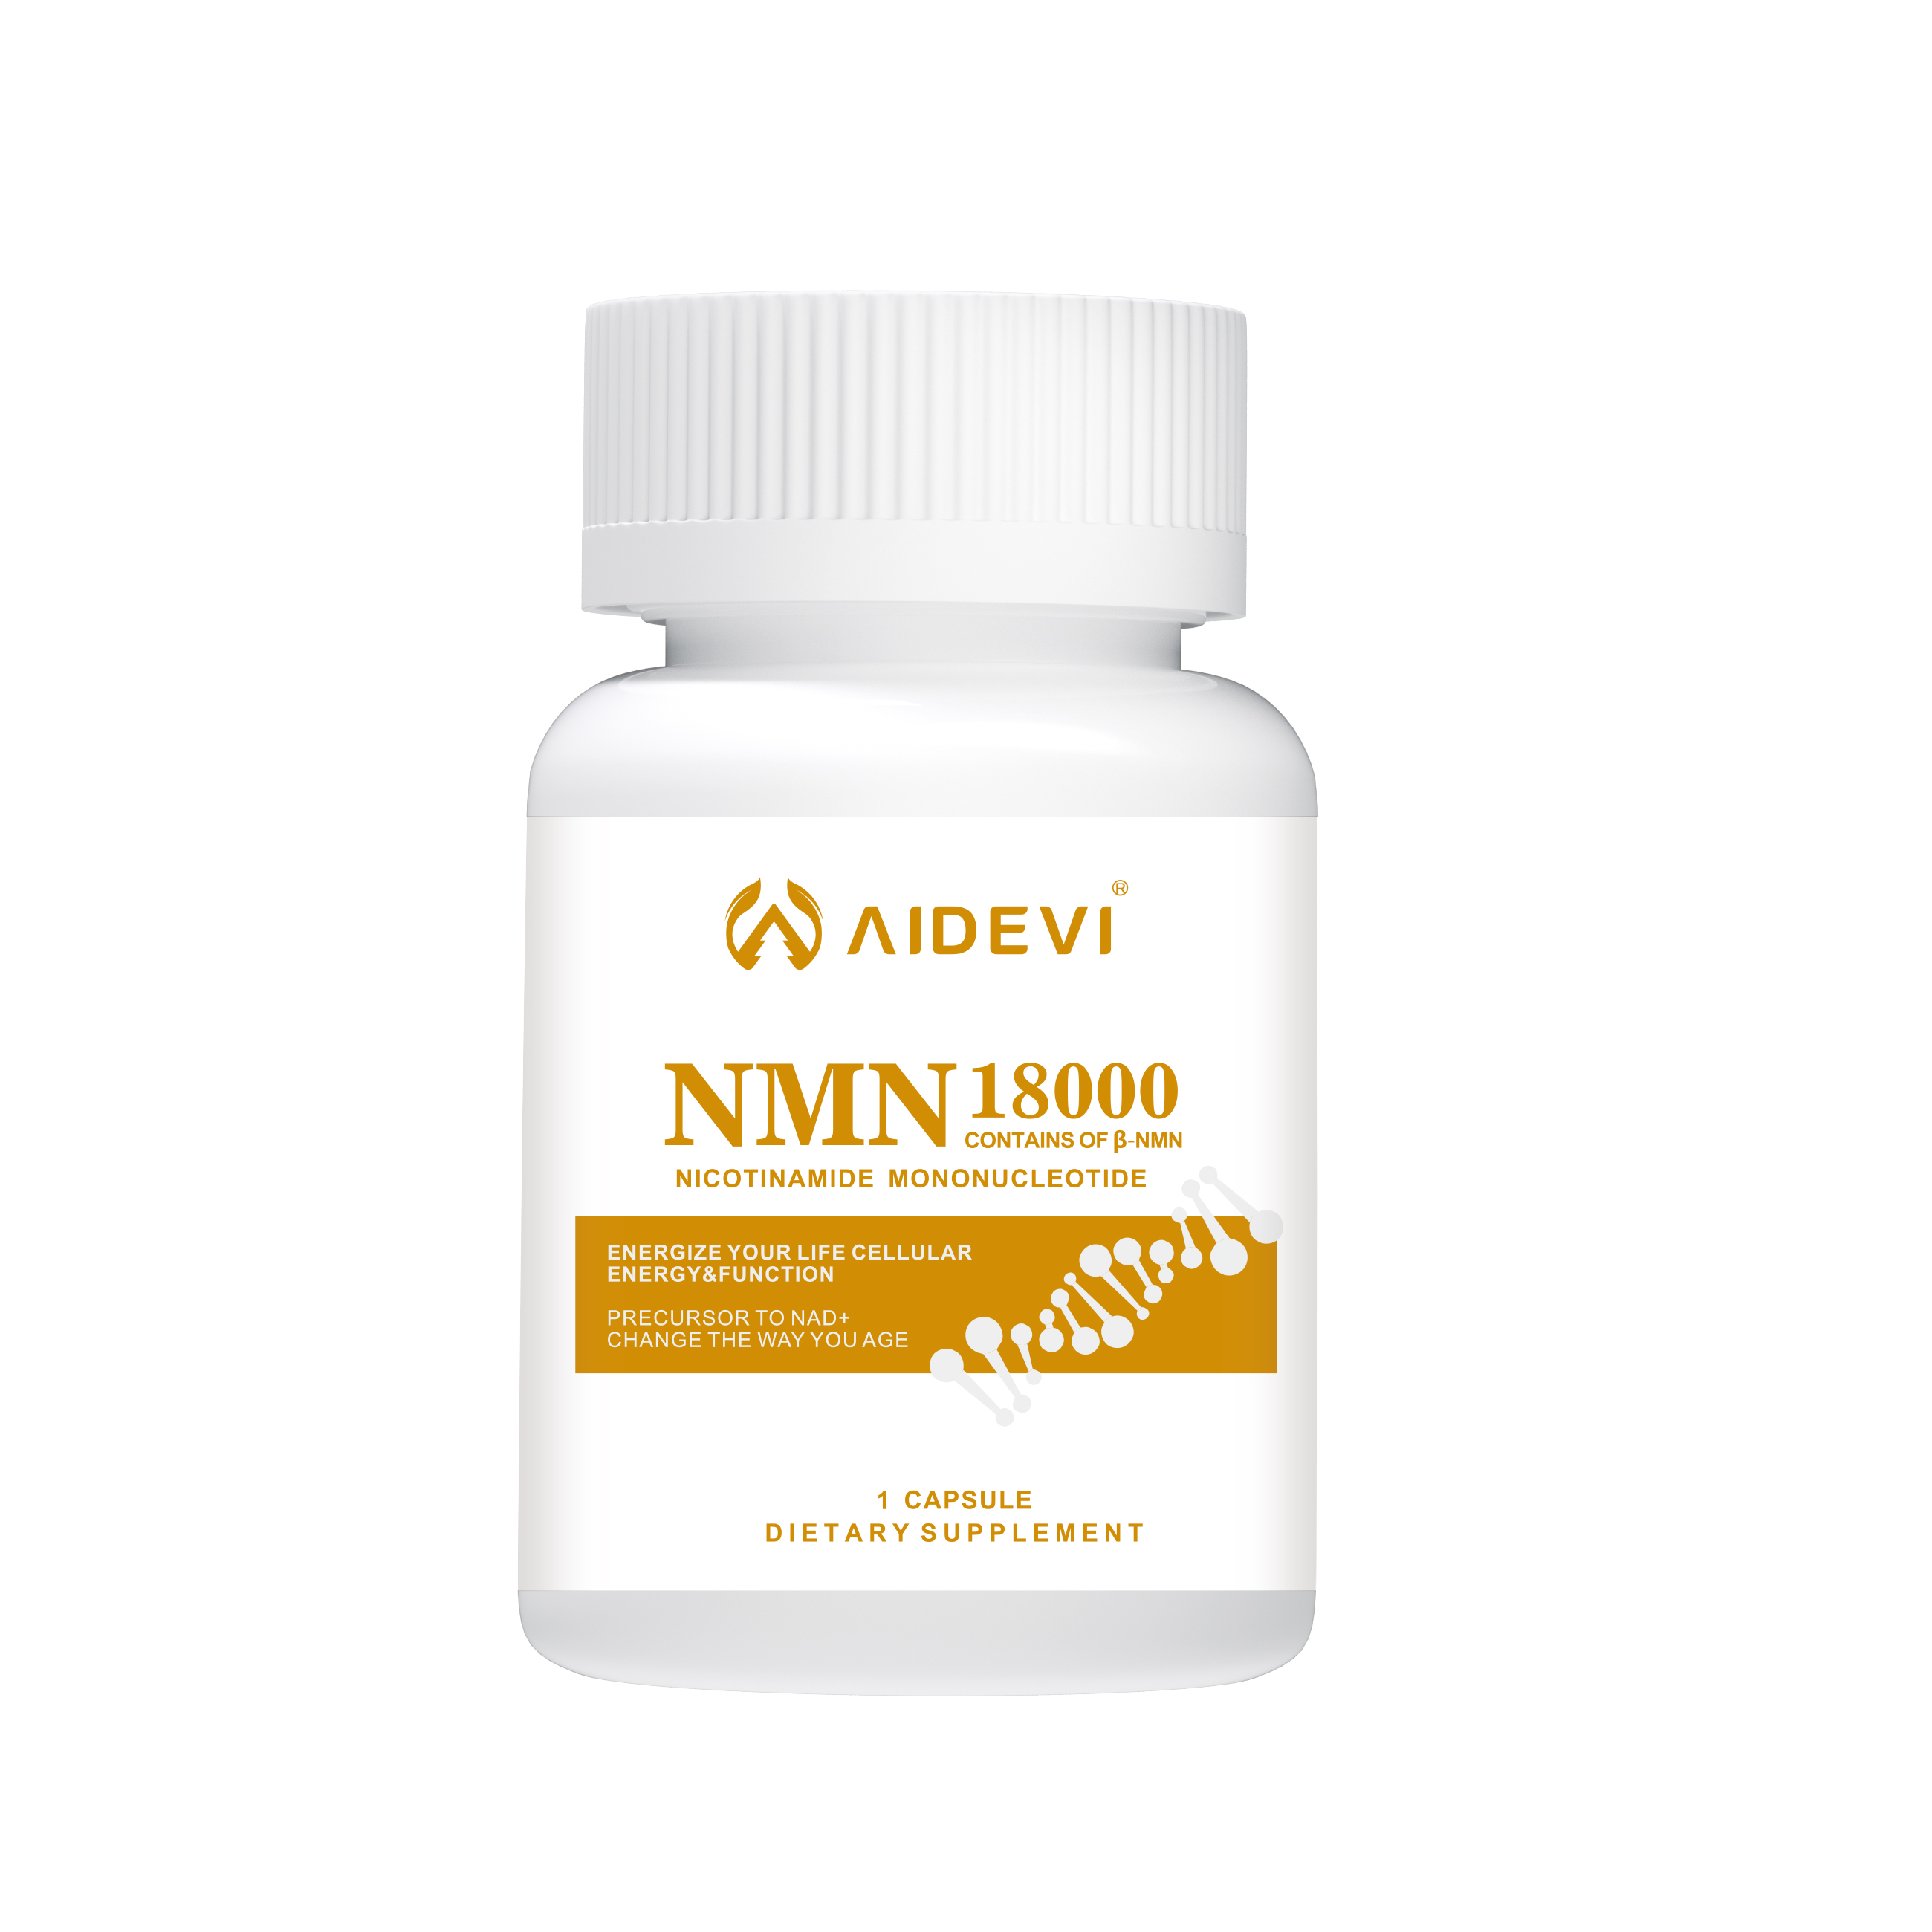 AIDEVI NMN18000 300MG NMN β-Nicotinamide Mononucleotide 60PCS CAPSULE (SET OF 3) DIETARY SUPPLEMENT MADE IN USA